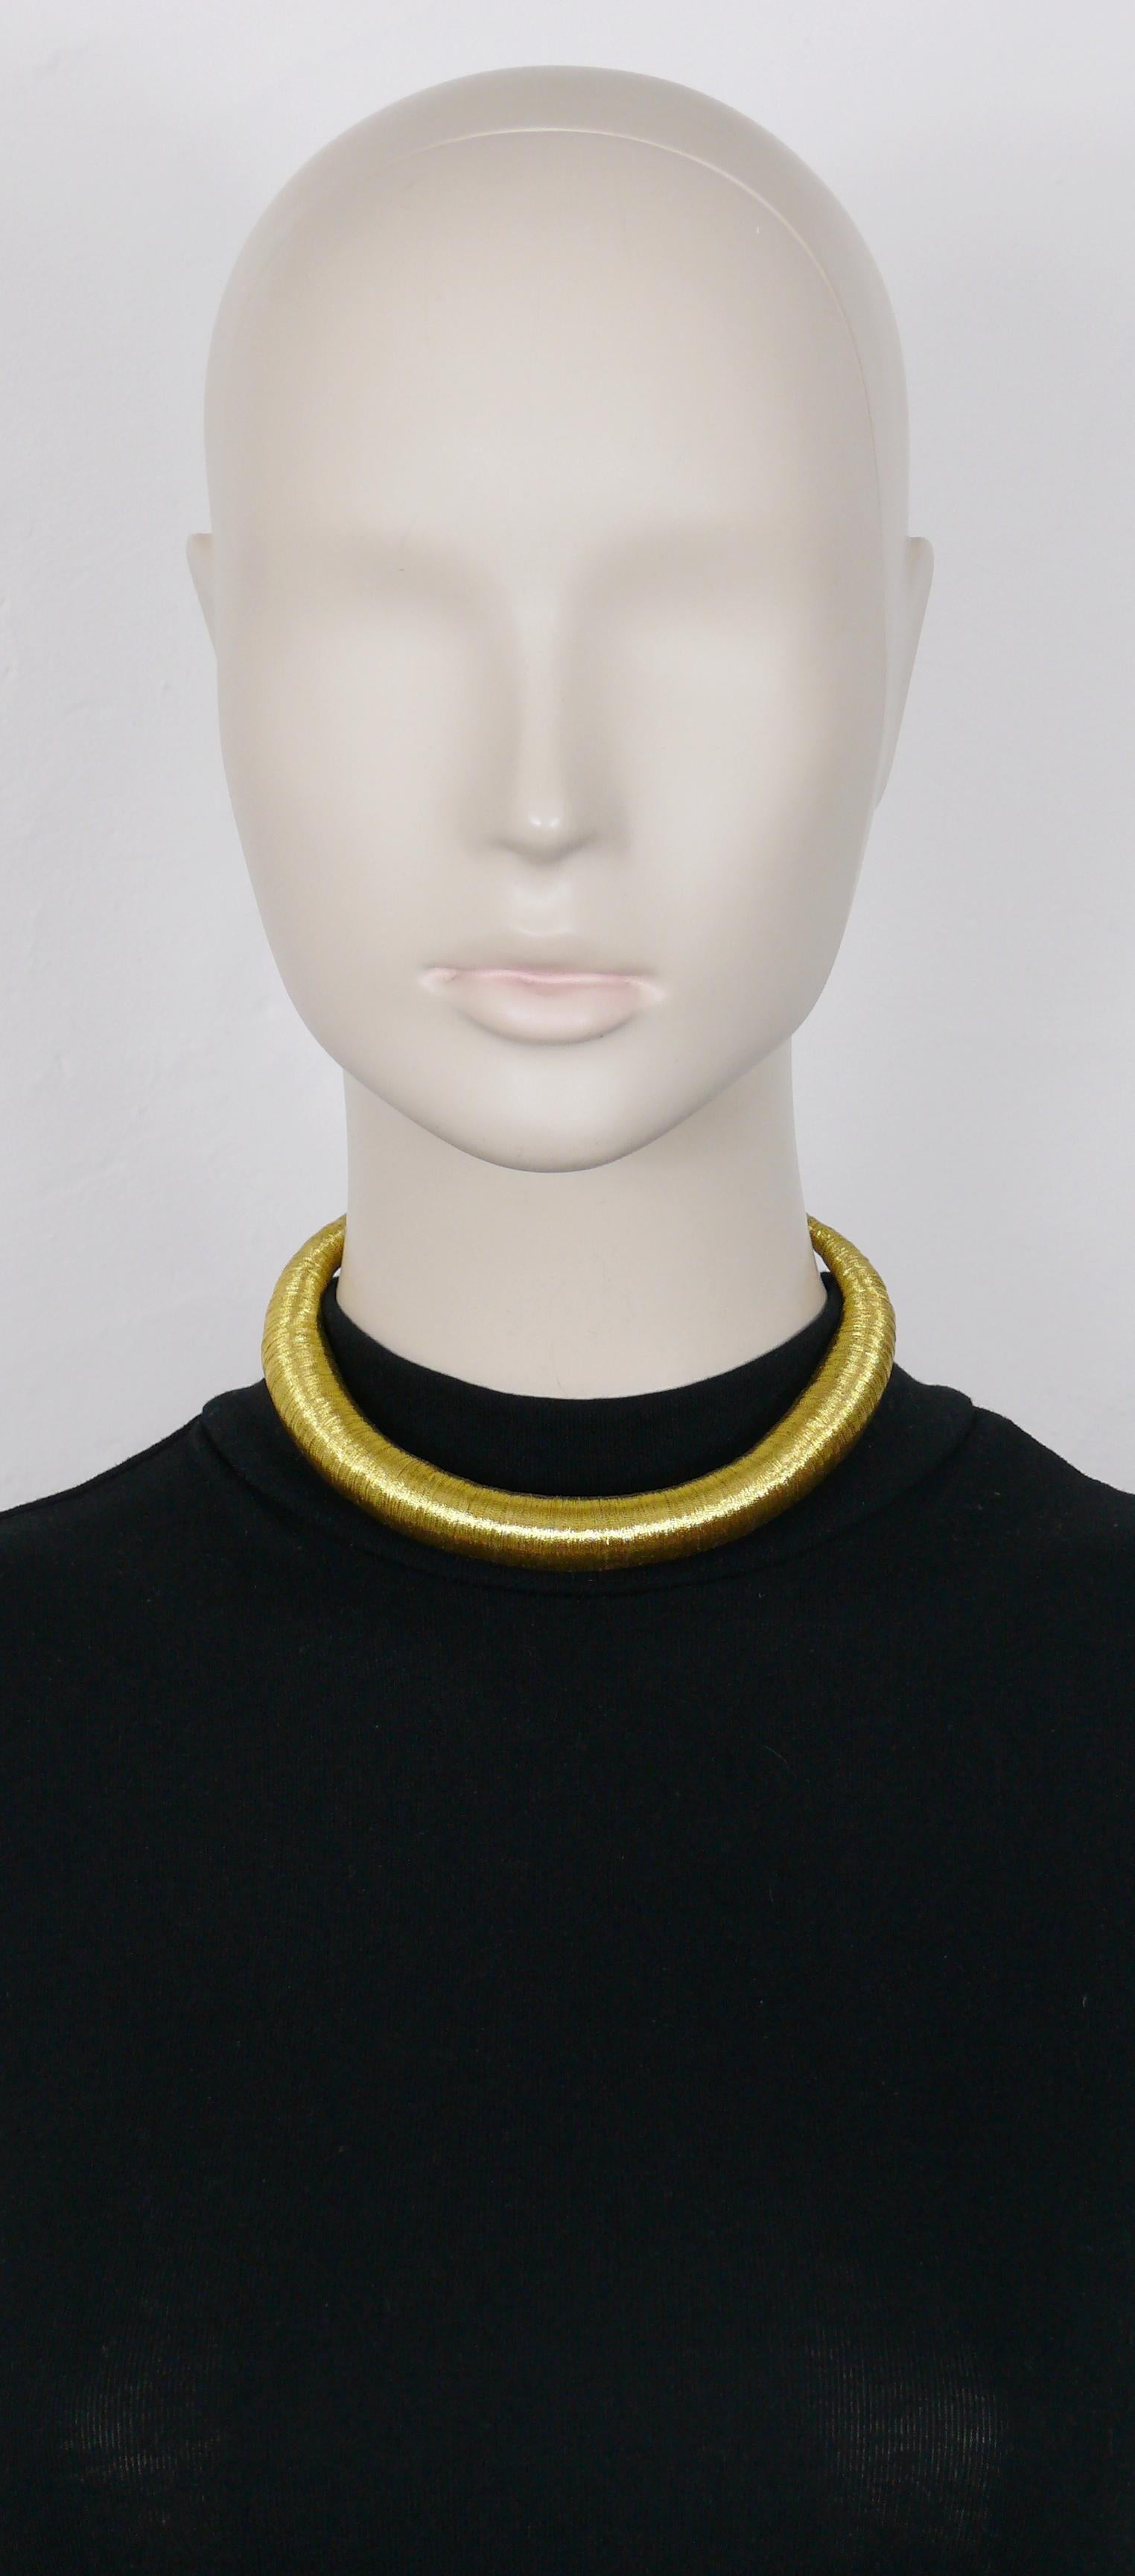 YVES SAINT LAURENT vintage lightweight torque necklace. made of braided gold toned threads.

Ball and toggle closure.

Embossed YSL on a metal hanging tag.

Indicative measurements : inner circumference (unstretched) approx. 32.99 cm (12.99 inches)